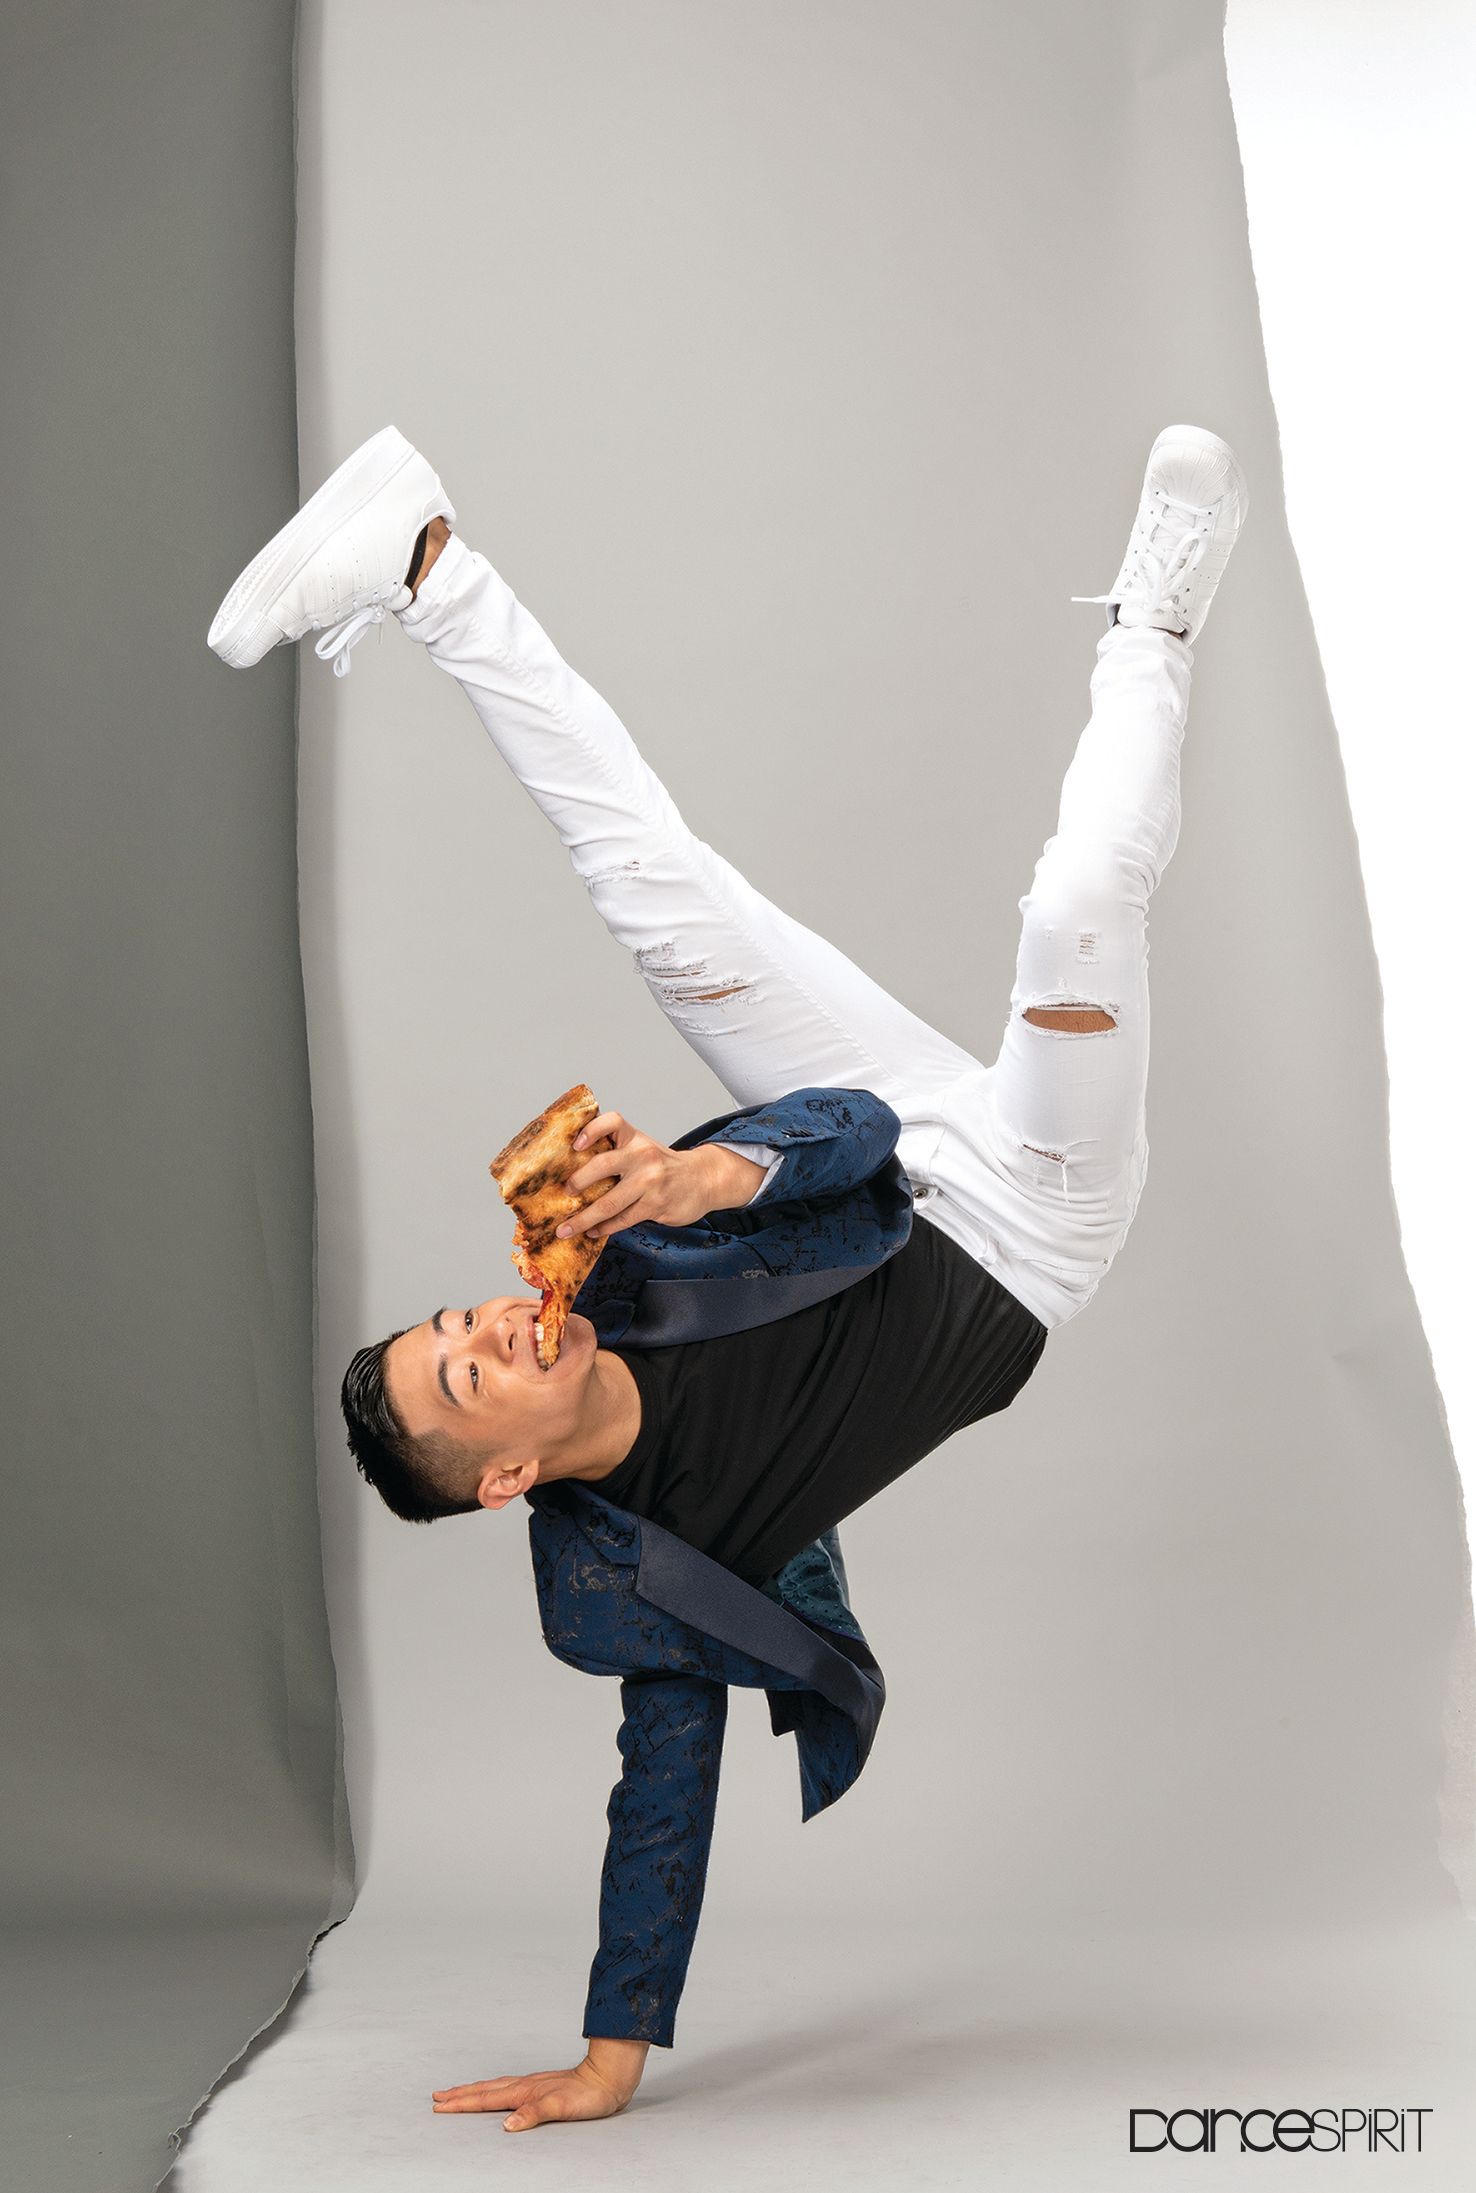 So You Think You Can Dance Season 16 Winner Bailey Munoz Is The B Boy Who Can Do It All Dance Spirit